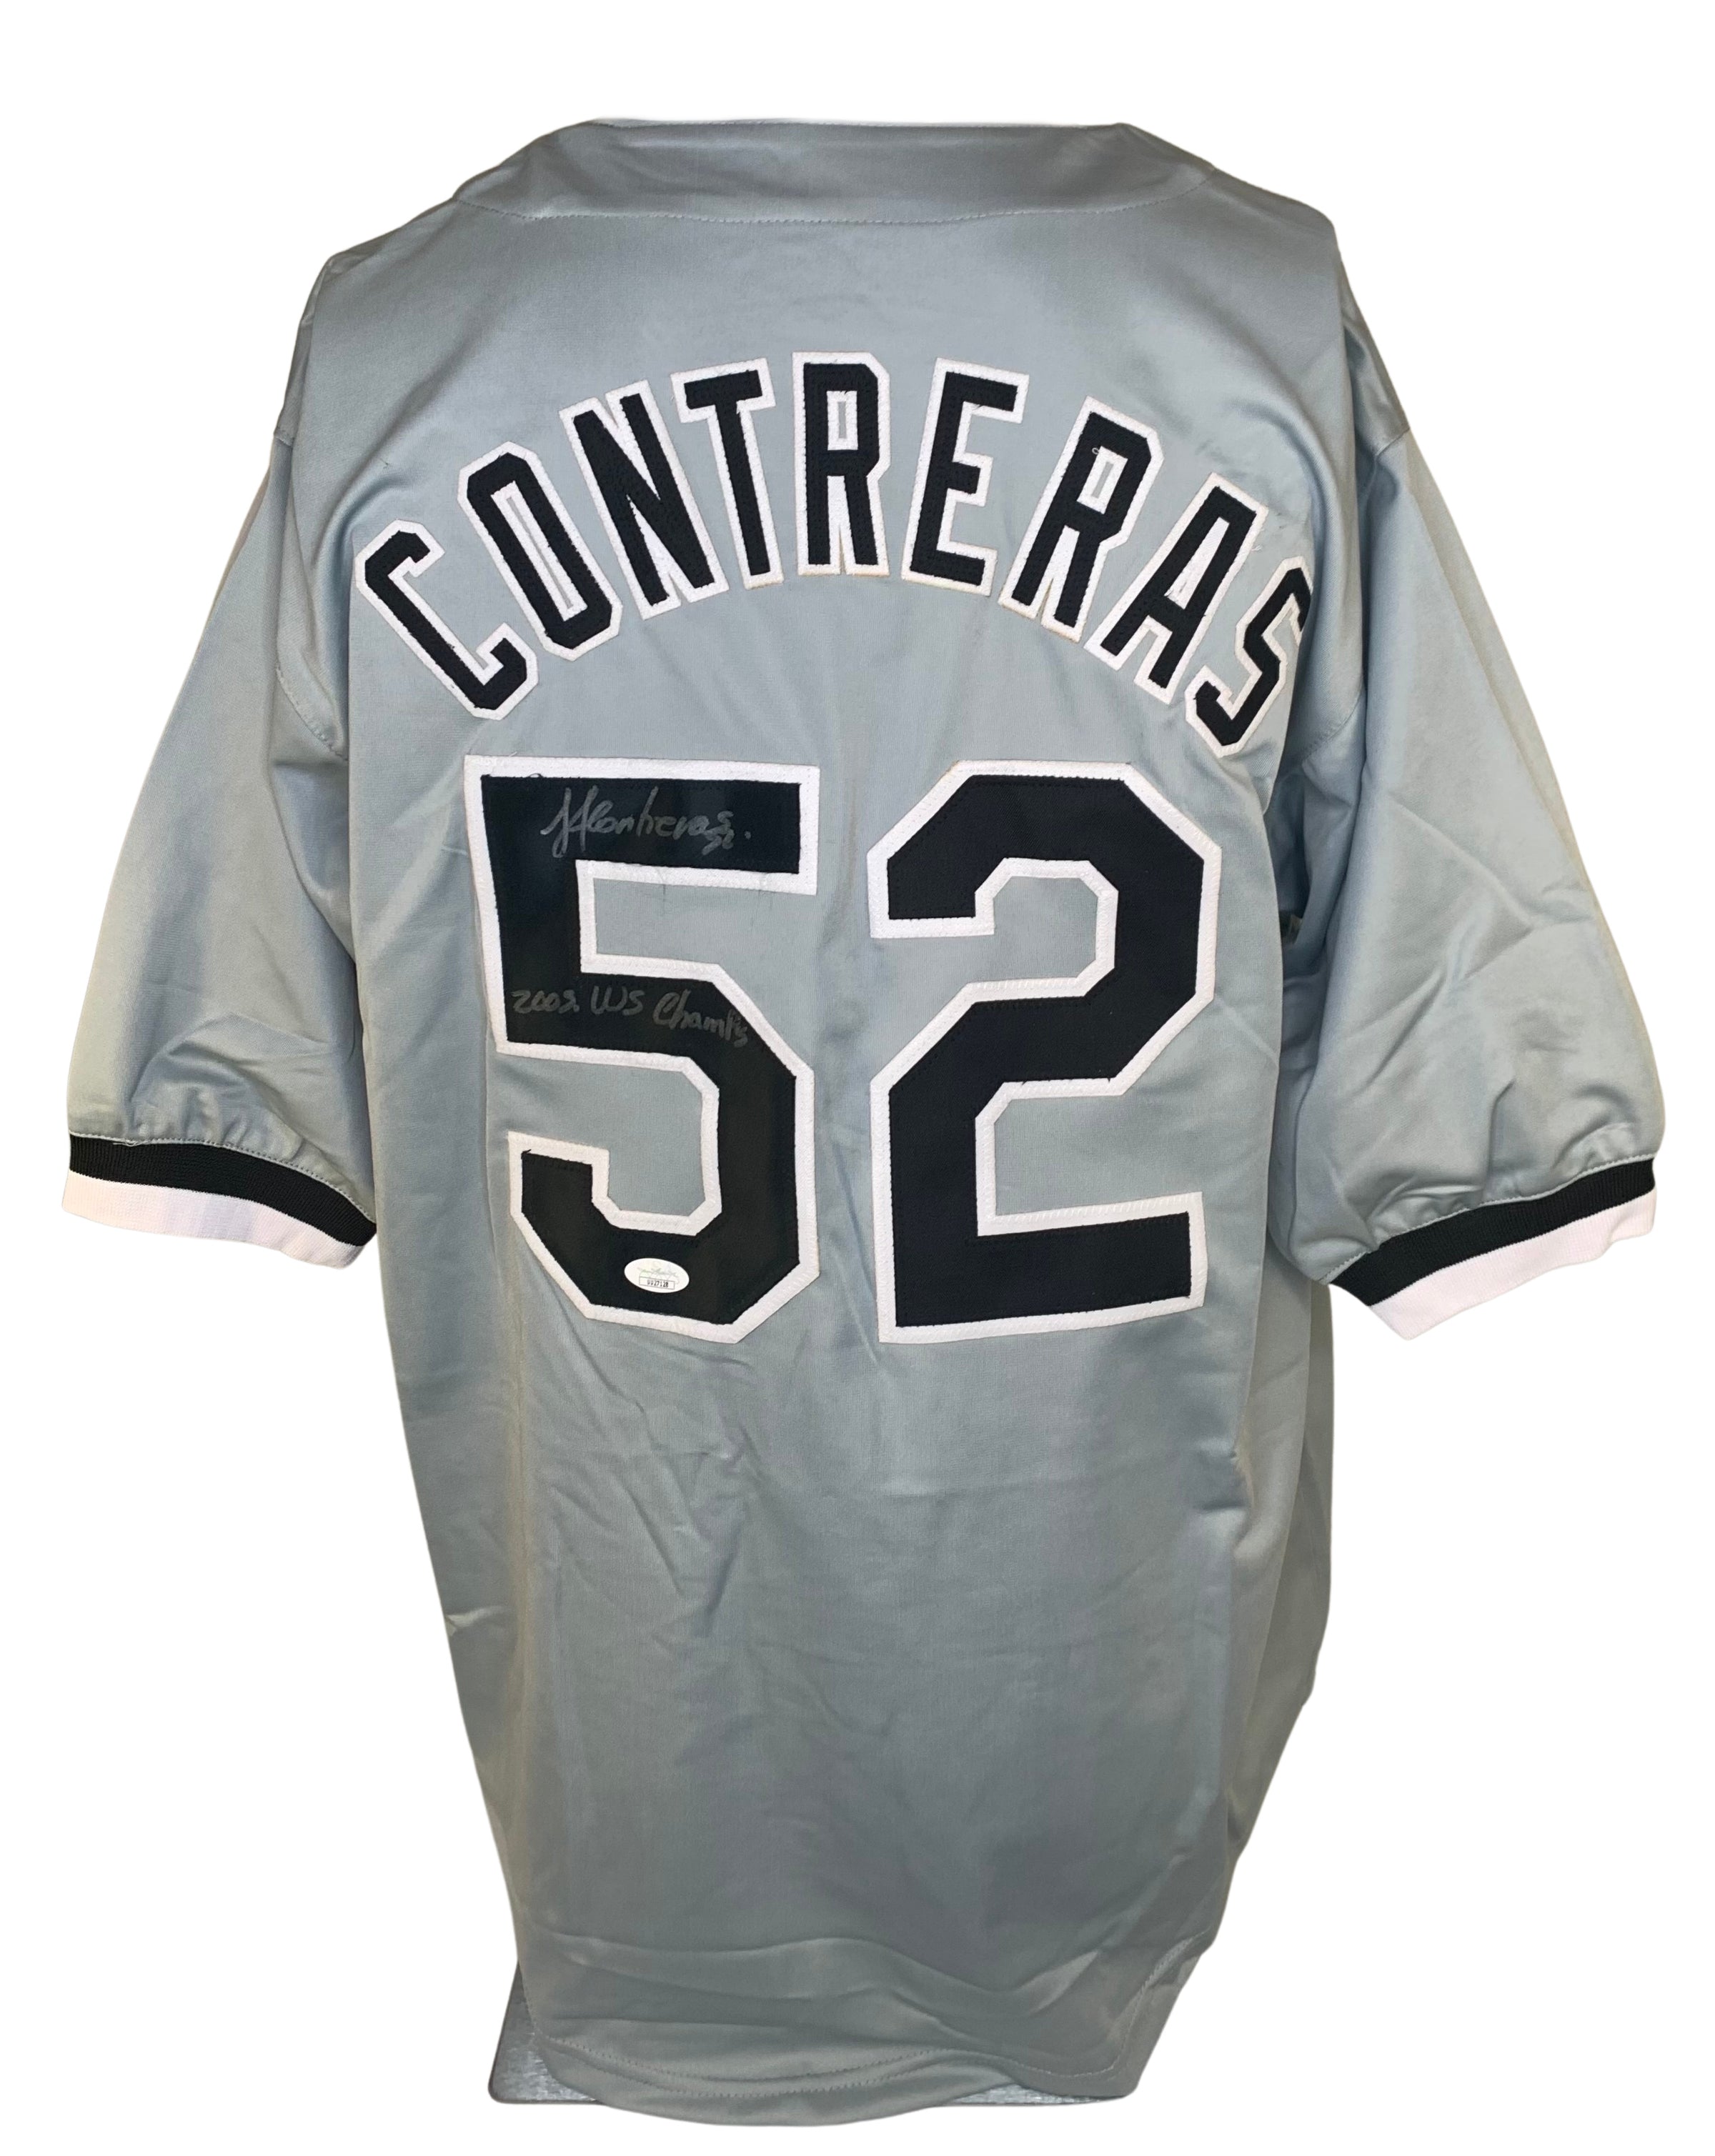 Jose Contreras autographed signed inscribed jersey MLB Chicago